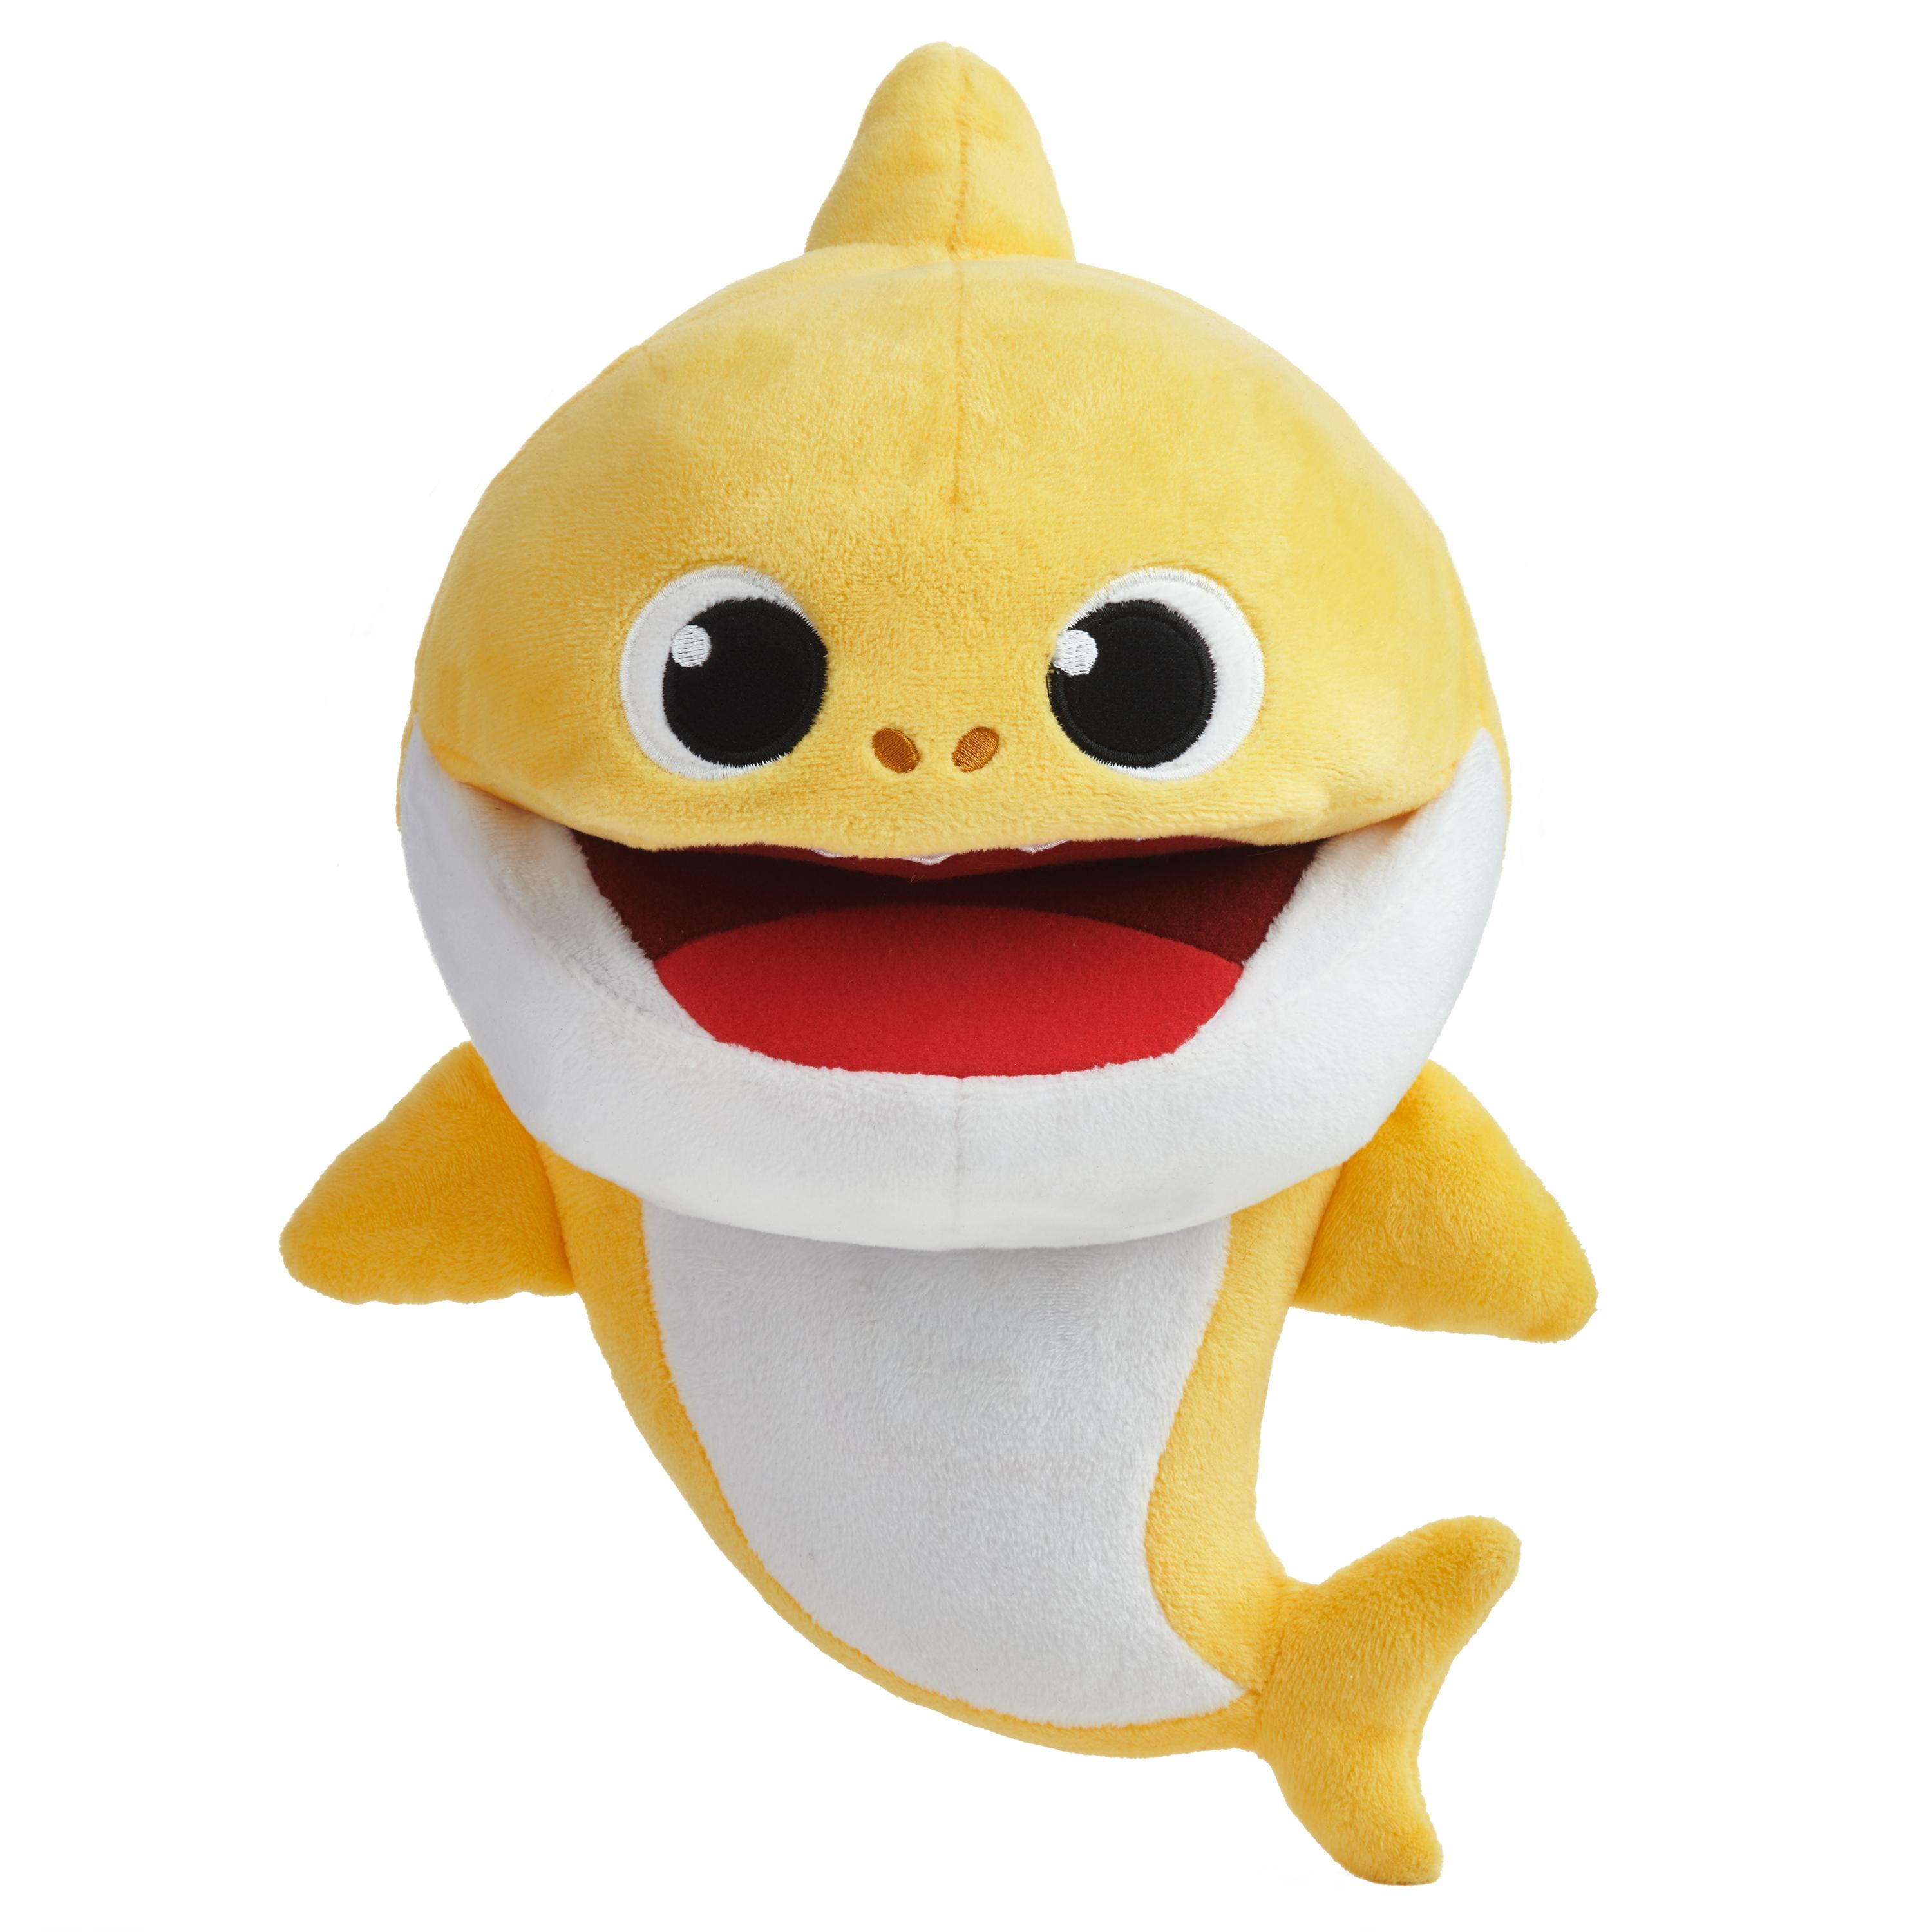  WowWee Pinkfong Baby Shark Offical 12 Fin Friend Plush with  Sound - Baby Shark, Yellow : Toys & Games